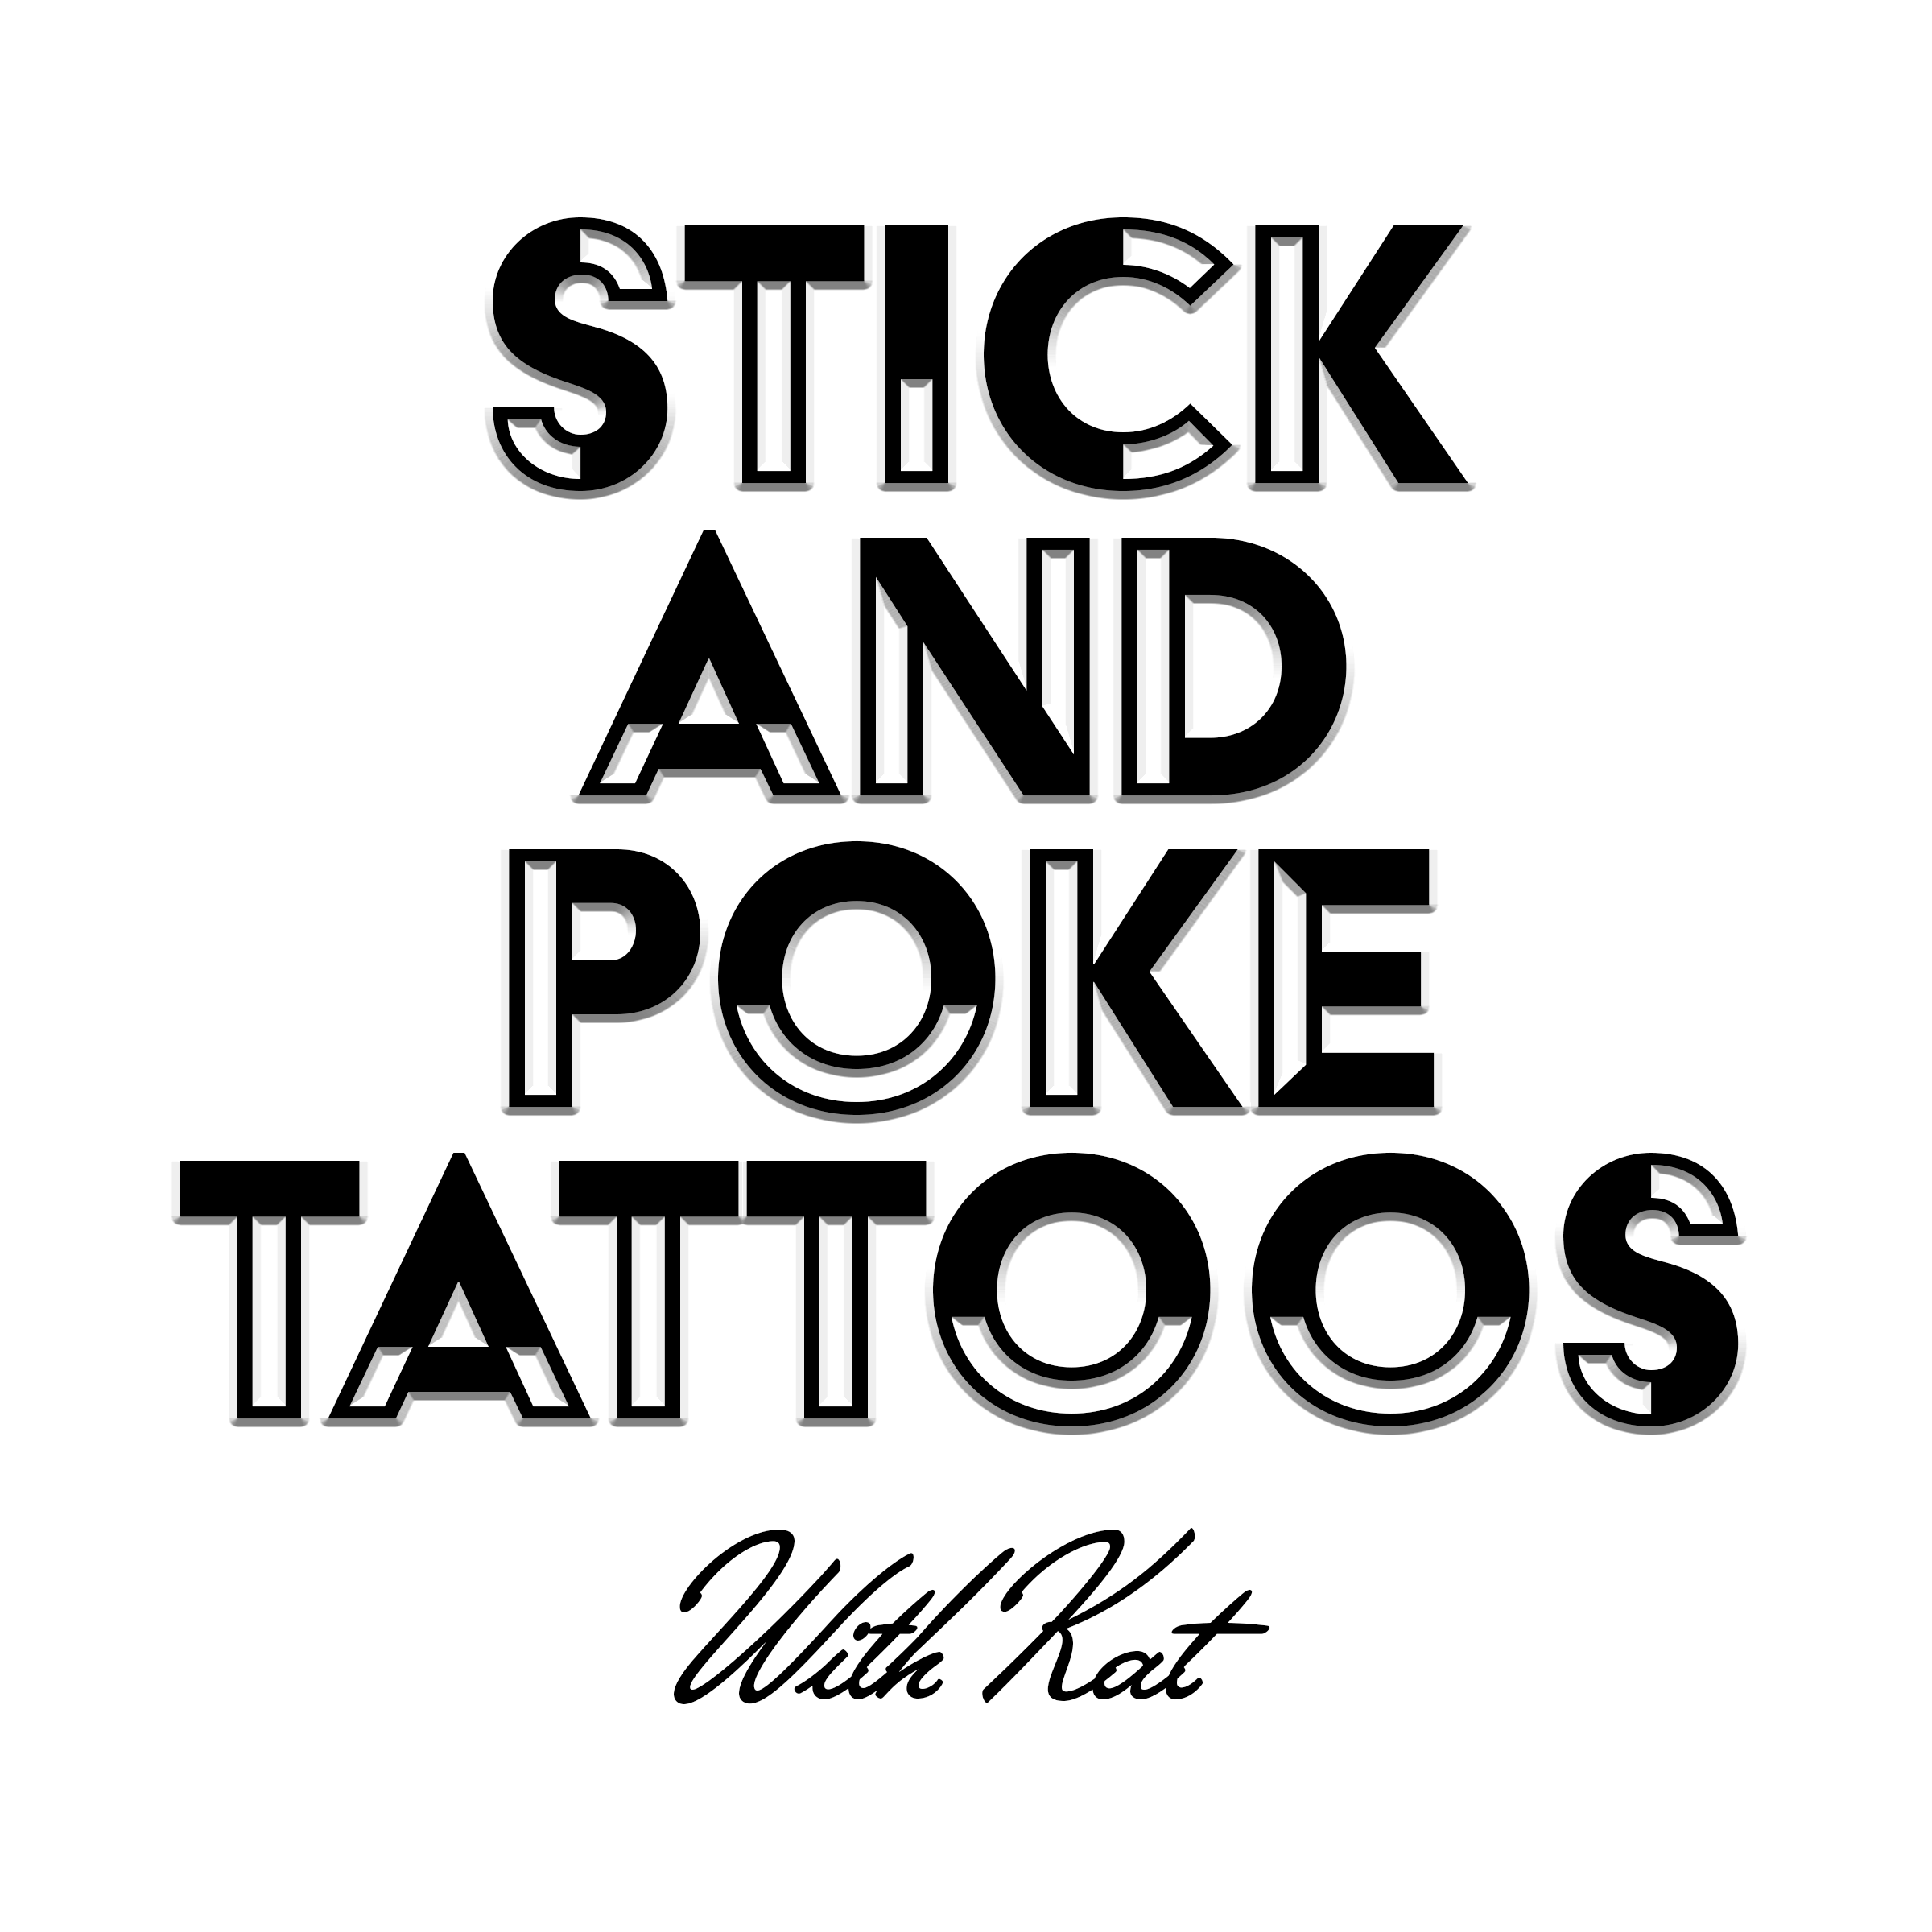 Emerging Homegrown Stick & Poke Artists Defining The Tattoo Culture